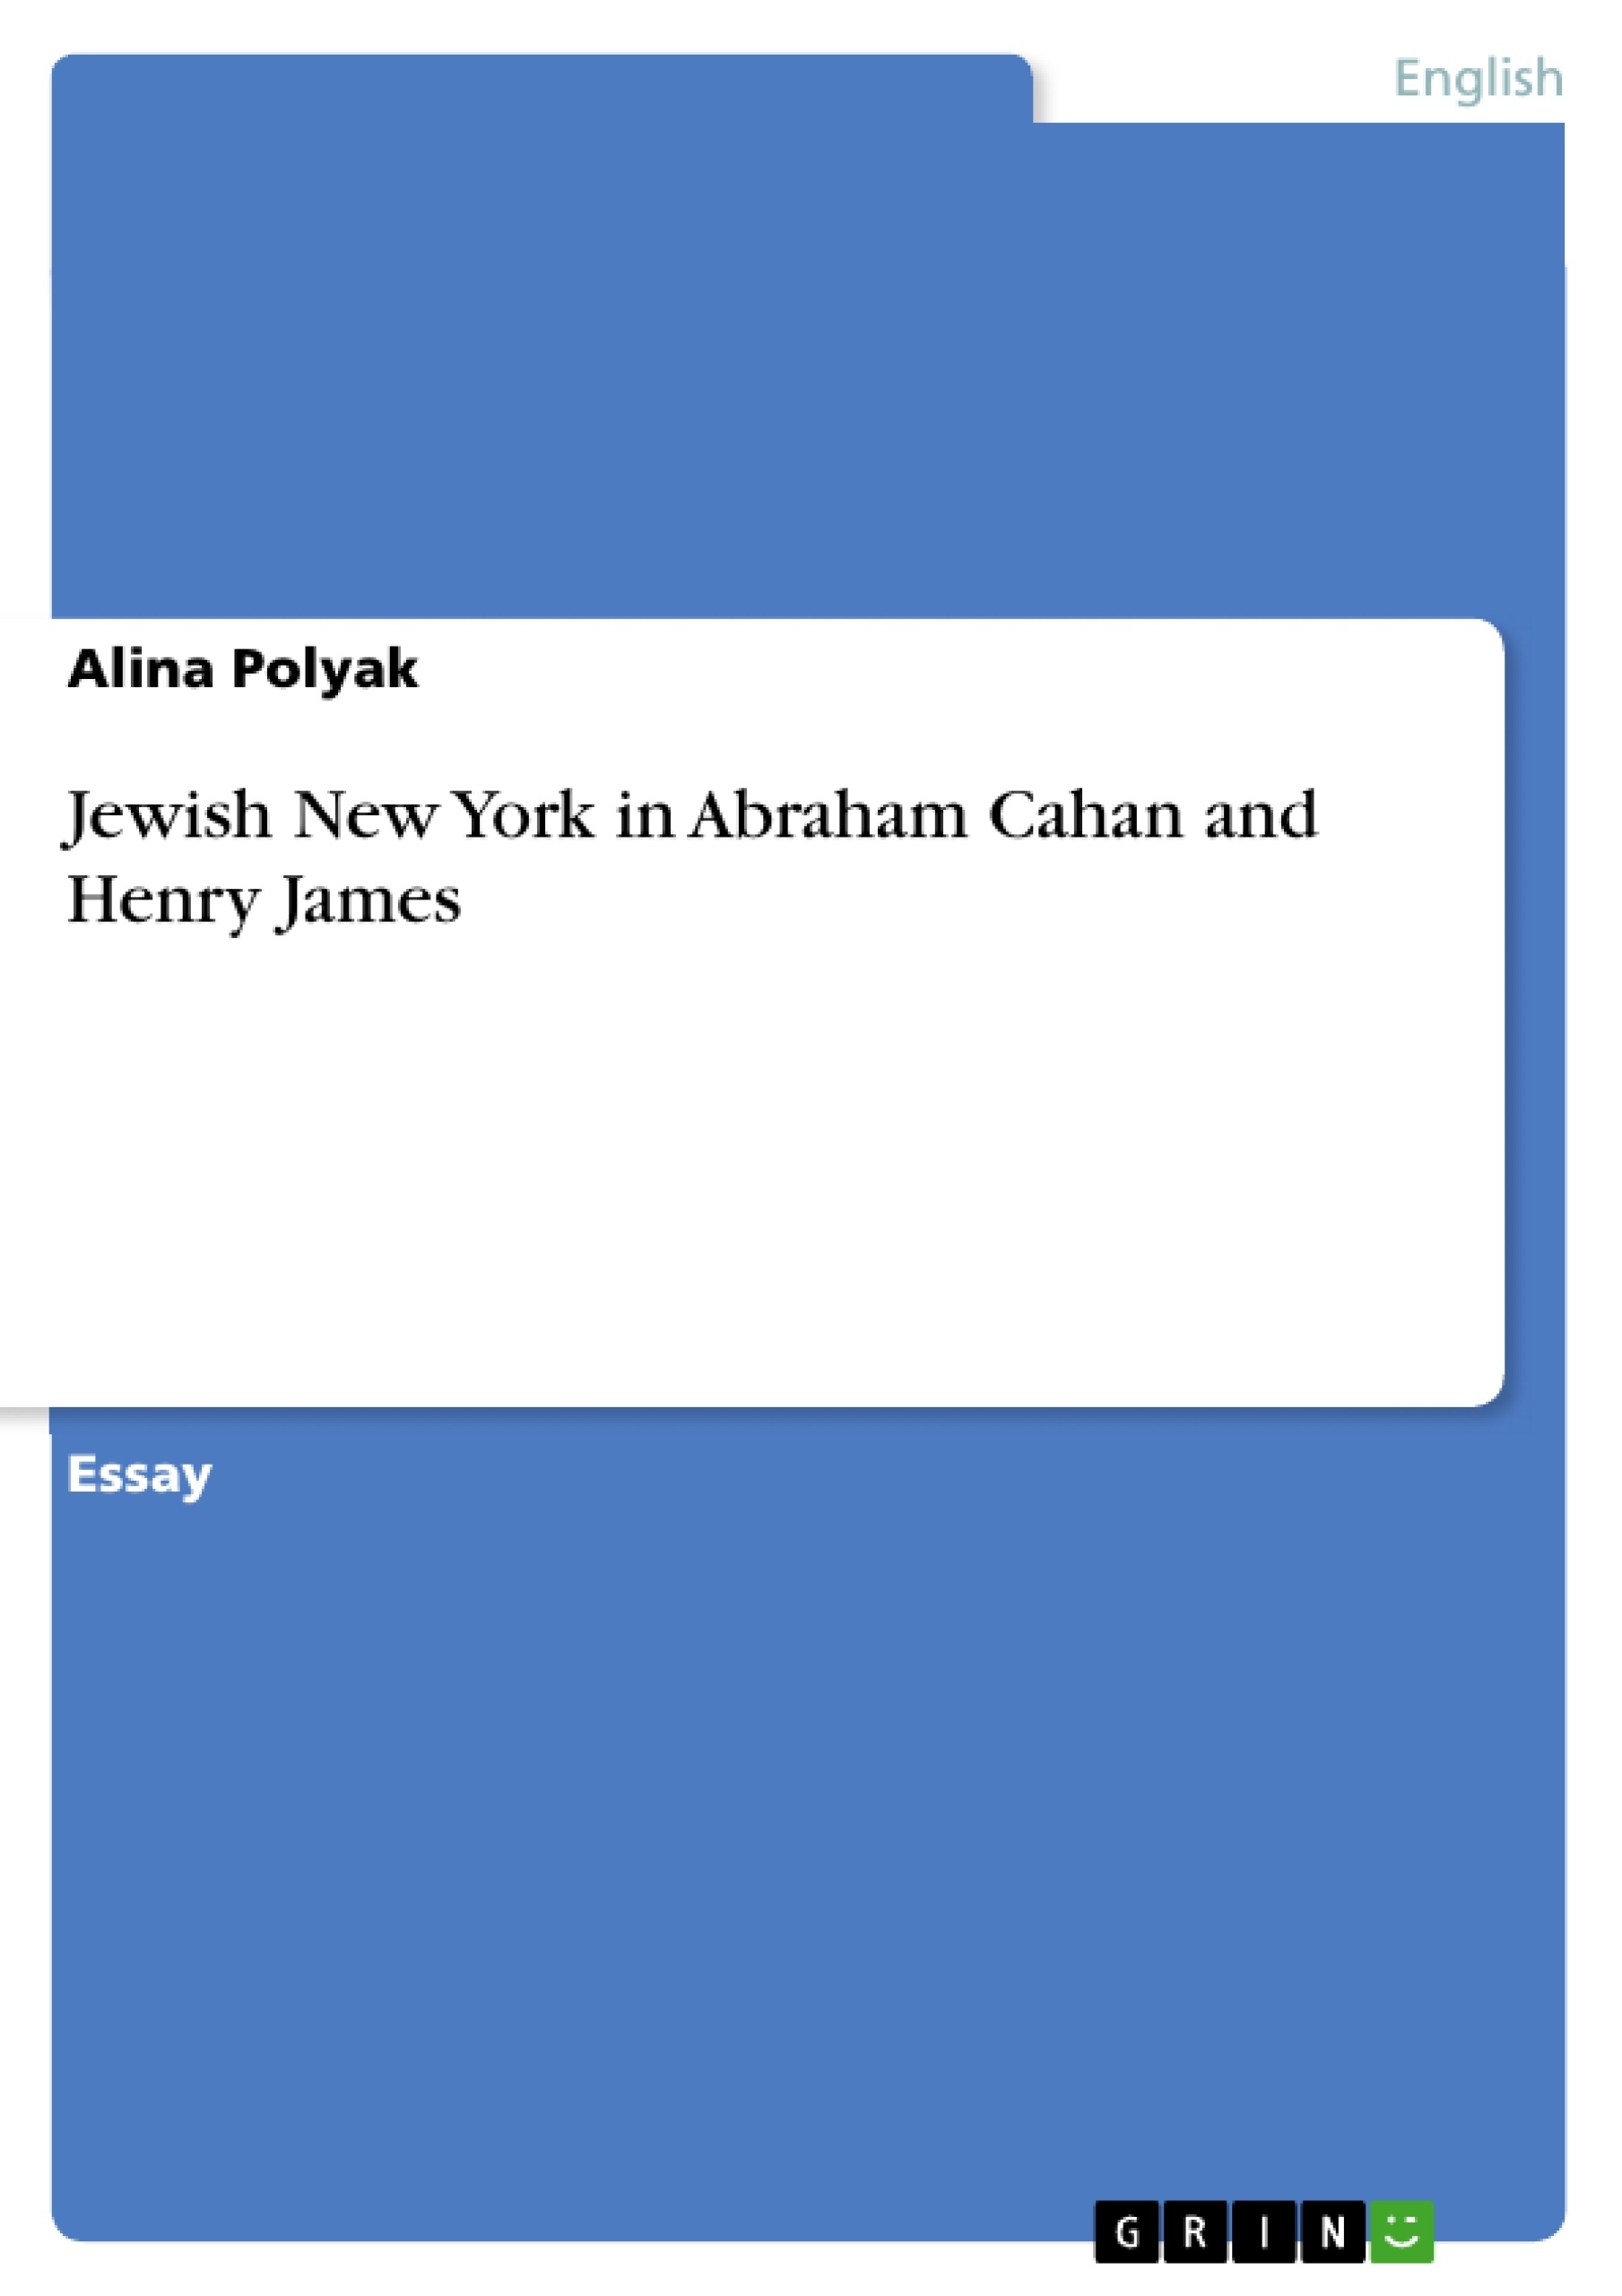 Titre: Jewish New York in Abraham Cahan and Henry James